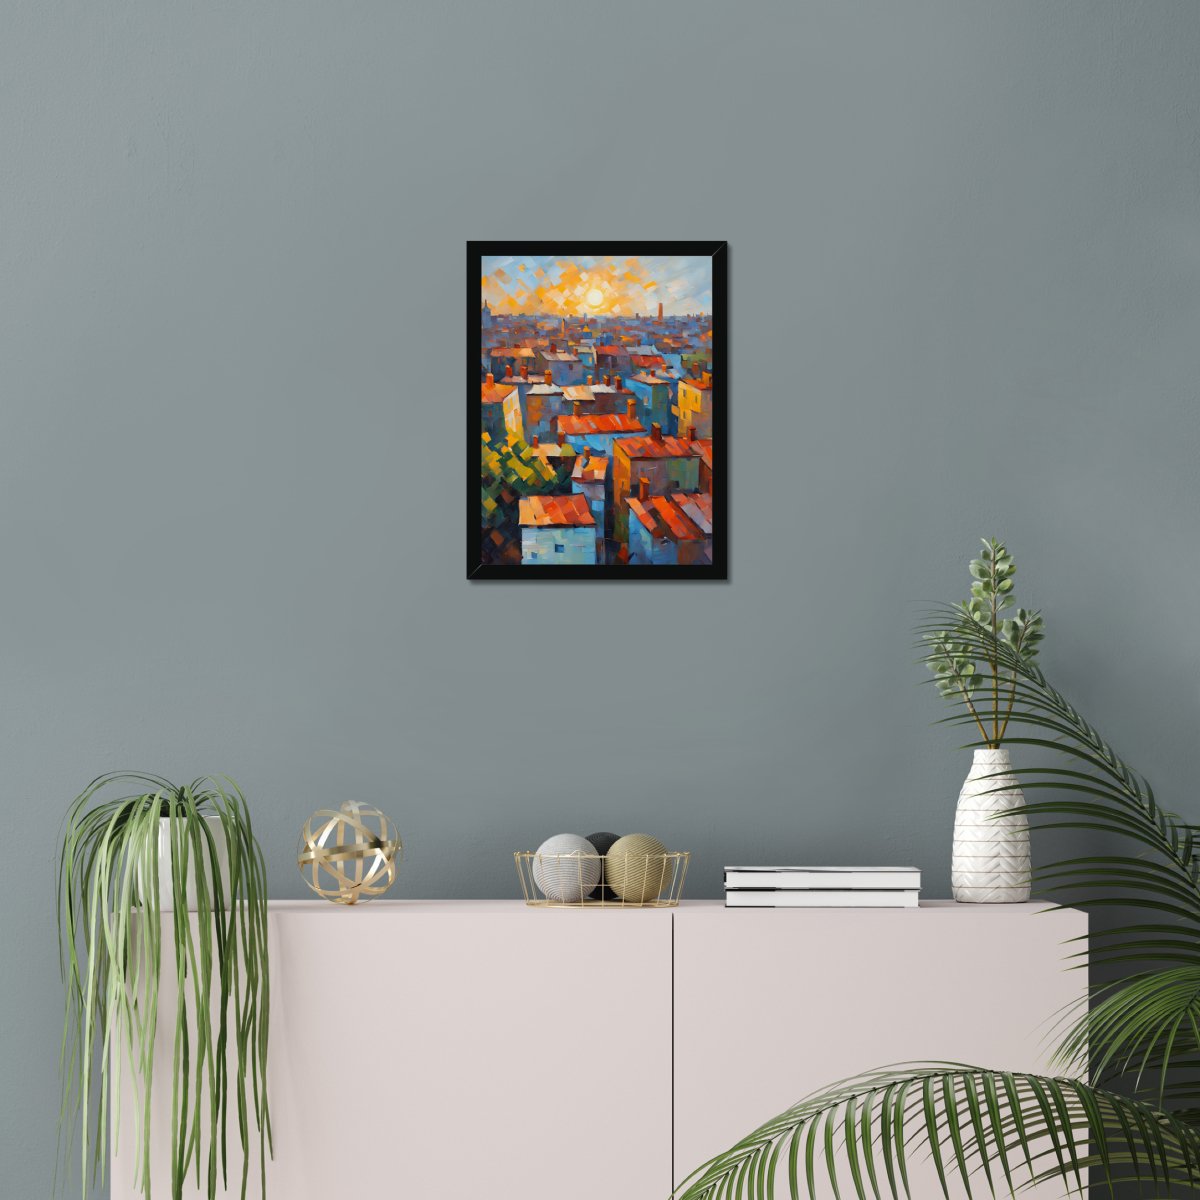 Cozy town life - Art print - Poster - Ever colorful